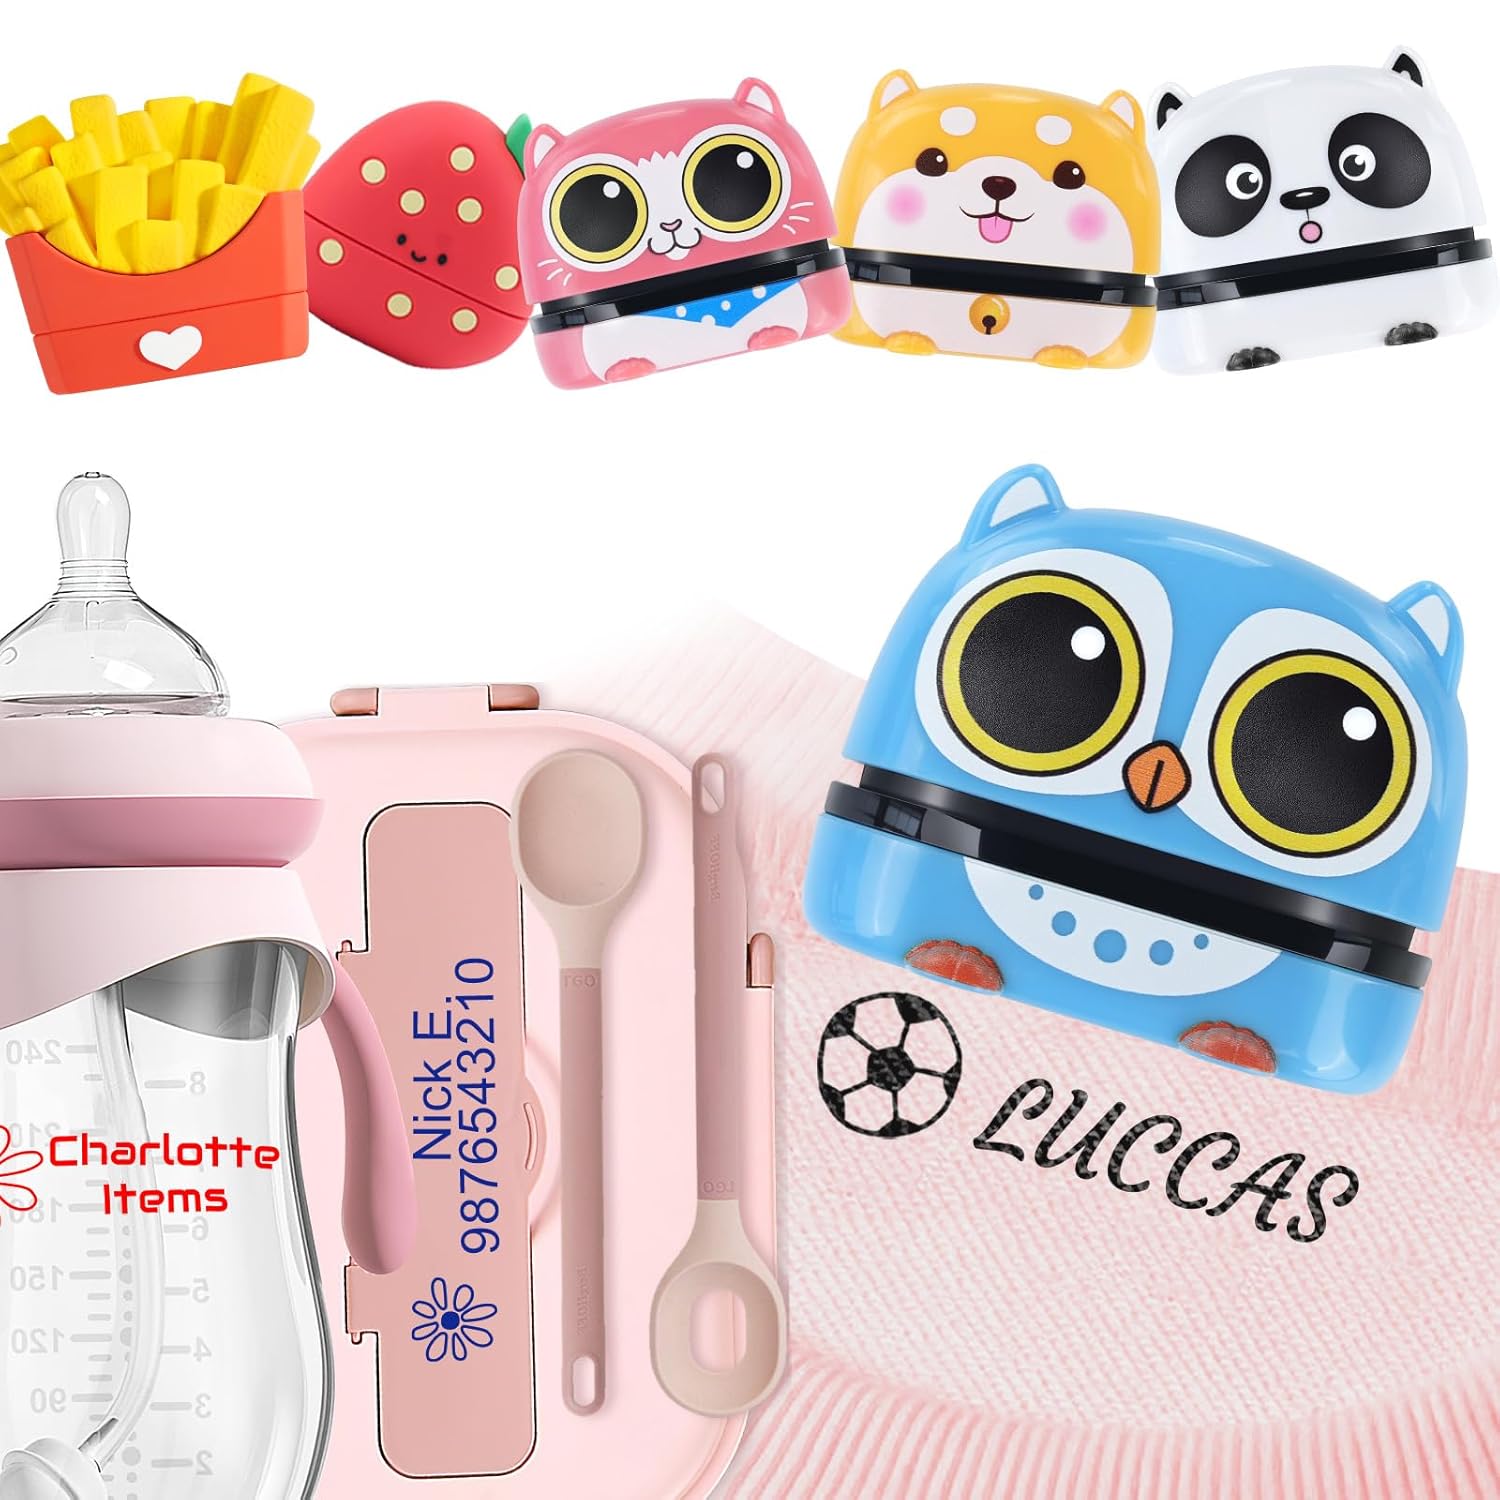 SUPHELPU Name Stamp for Clothing Kids Waterproof, Clothing Stamps for Clothes Permanent, Personalized Stamp with Name, School Daycare Essentials for Fabric Plastic Label Bottles Child Baby